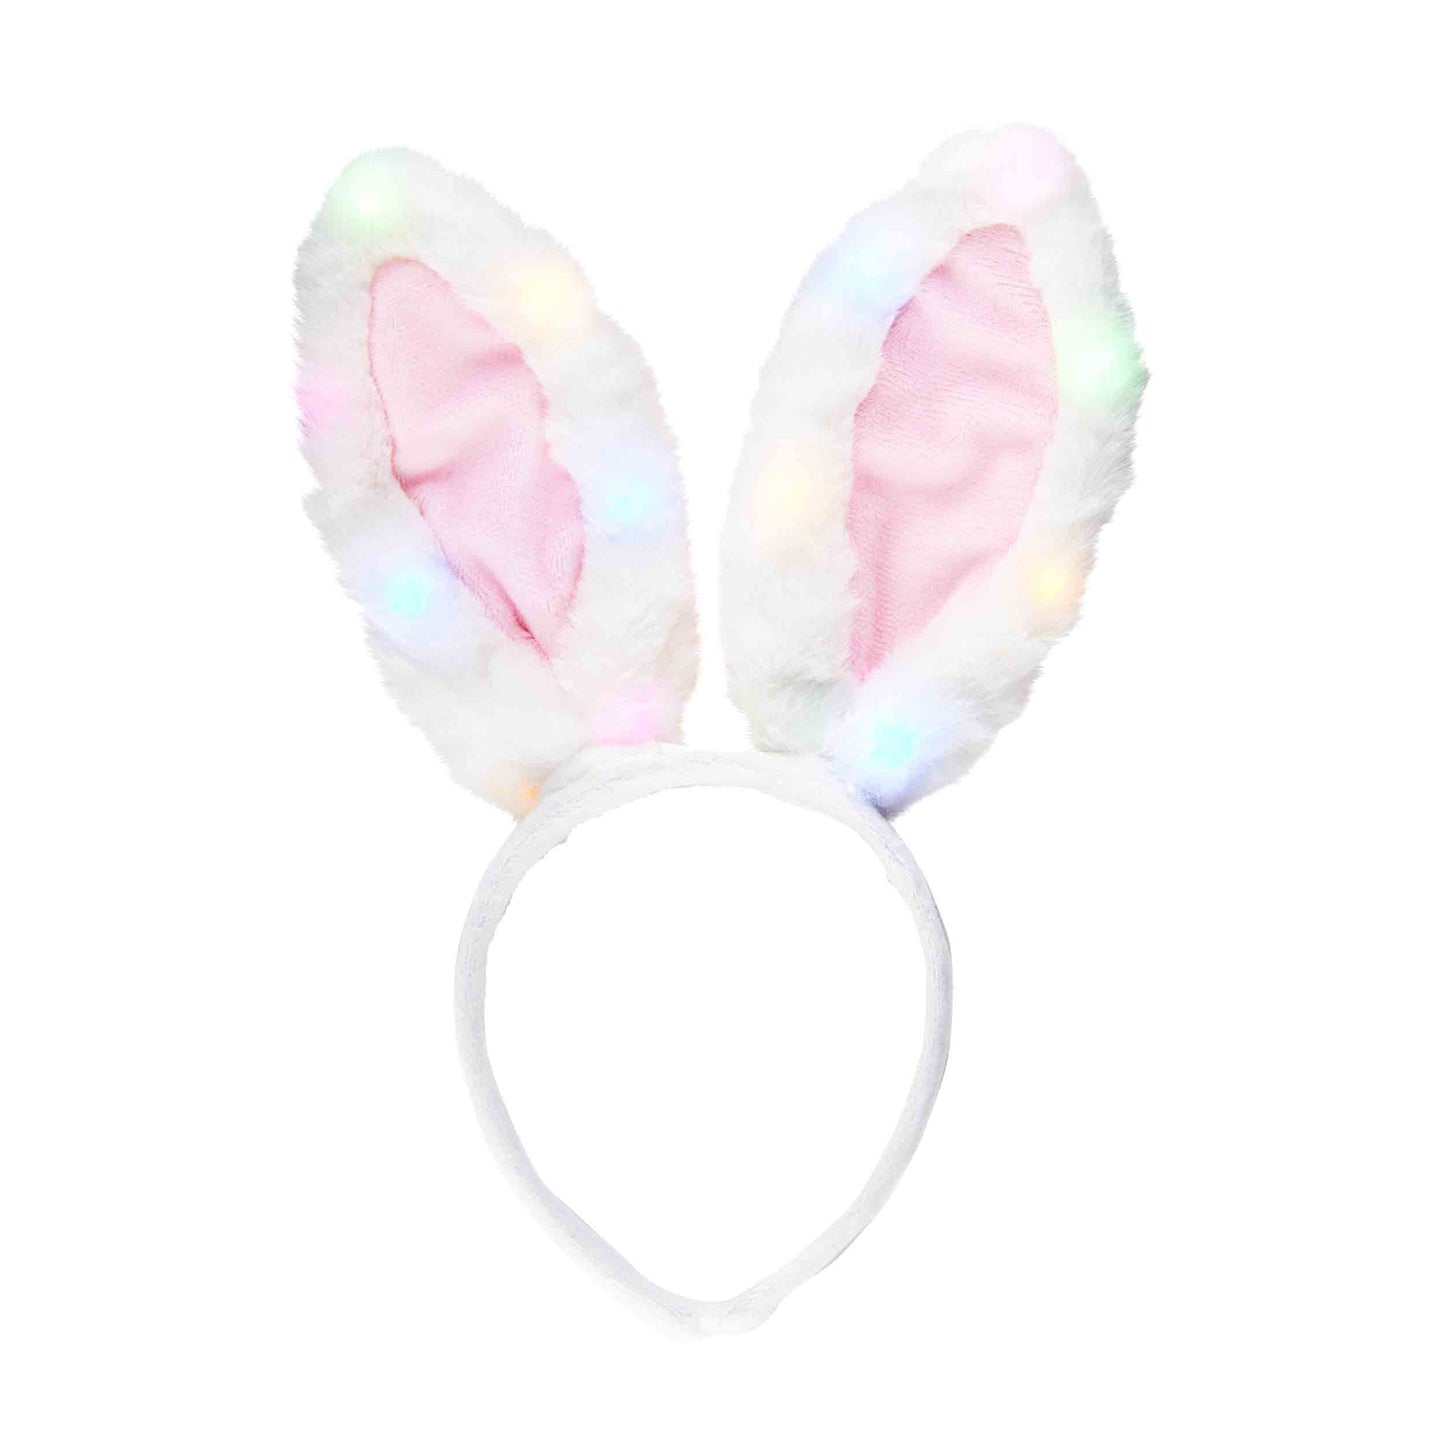 Light Up Bunny Ears - Assorted Colors